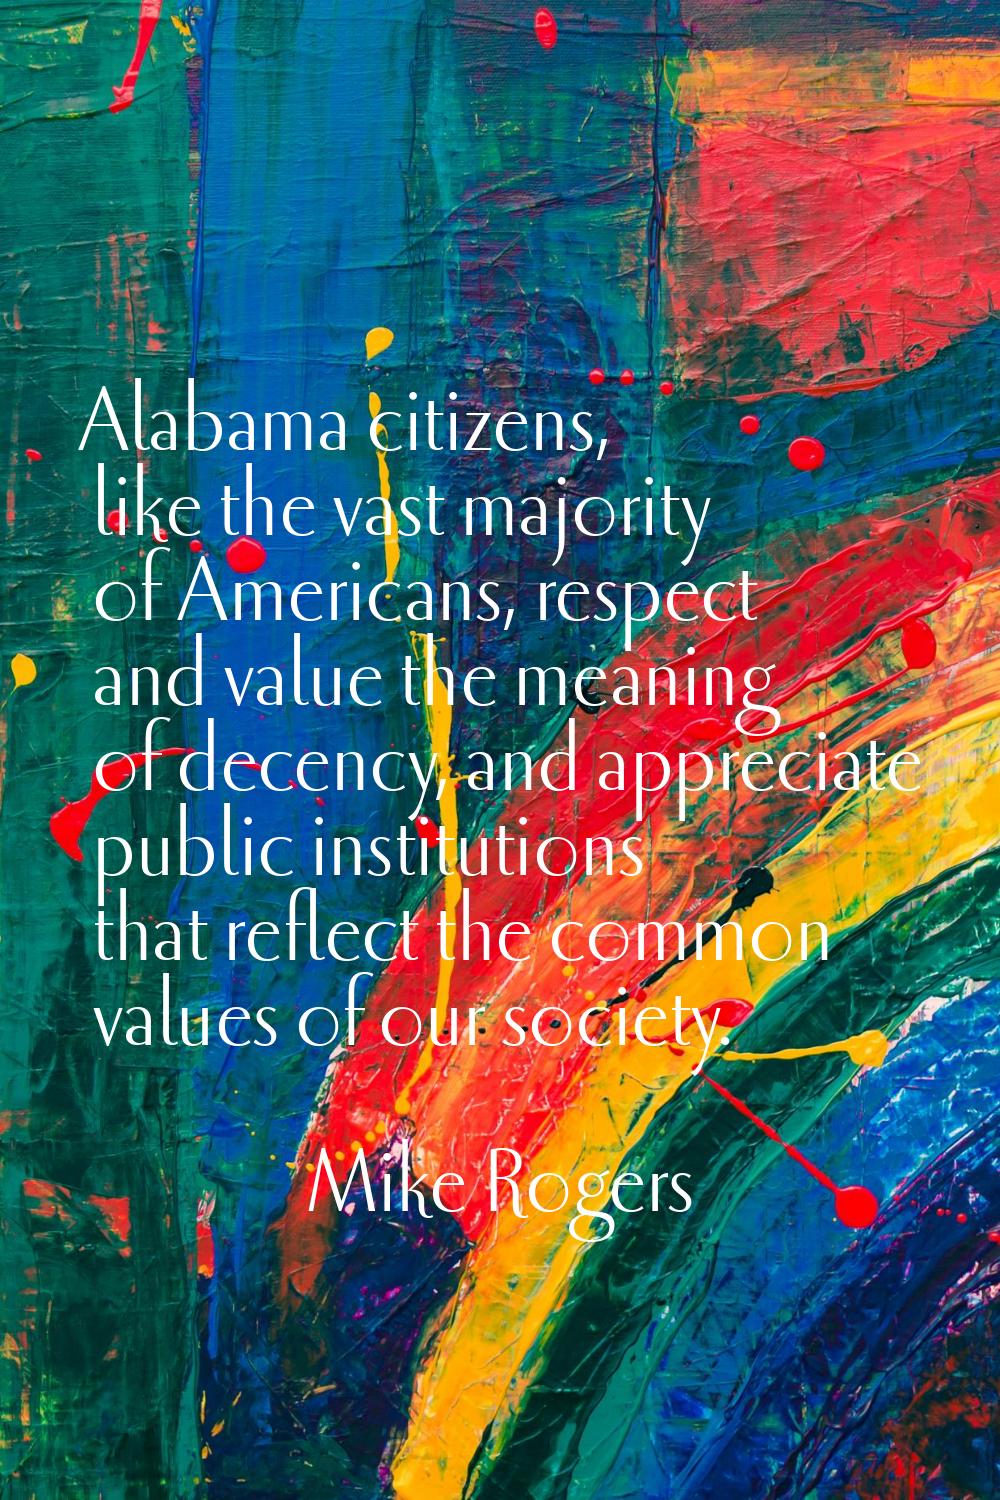 Alabama citizens, like the vast majority of Americans, respect and value the meaning of decency, an